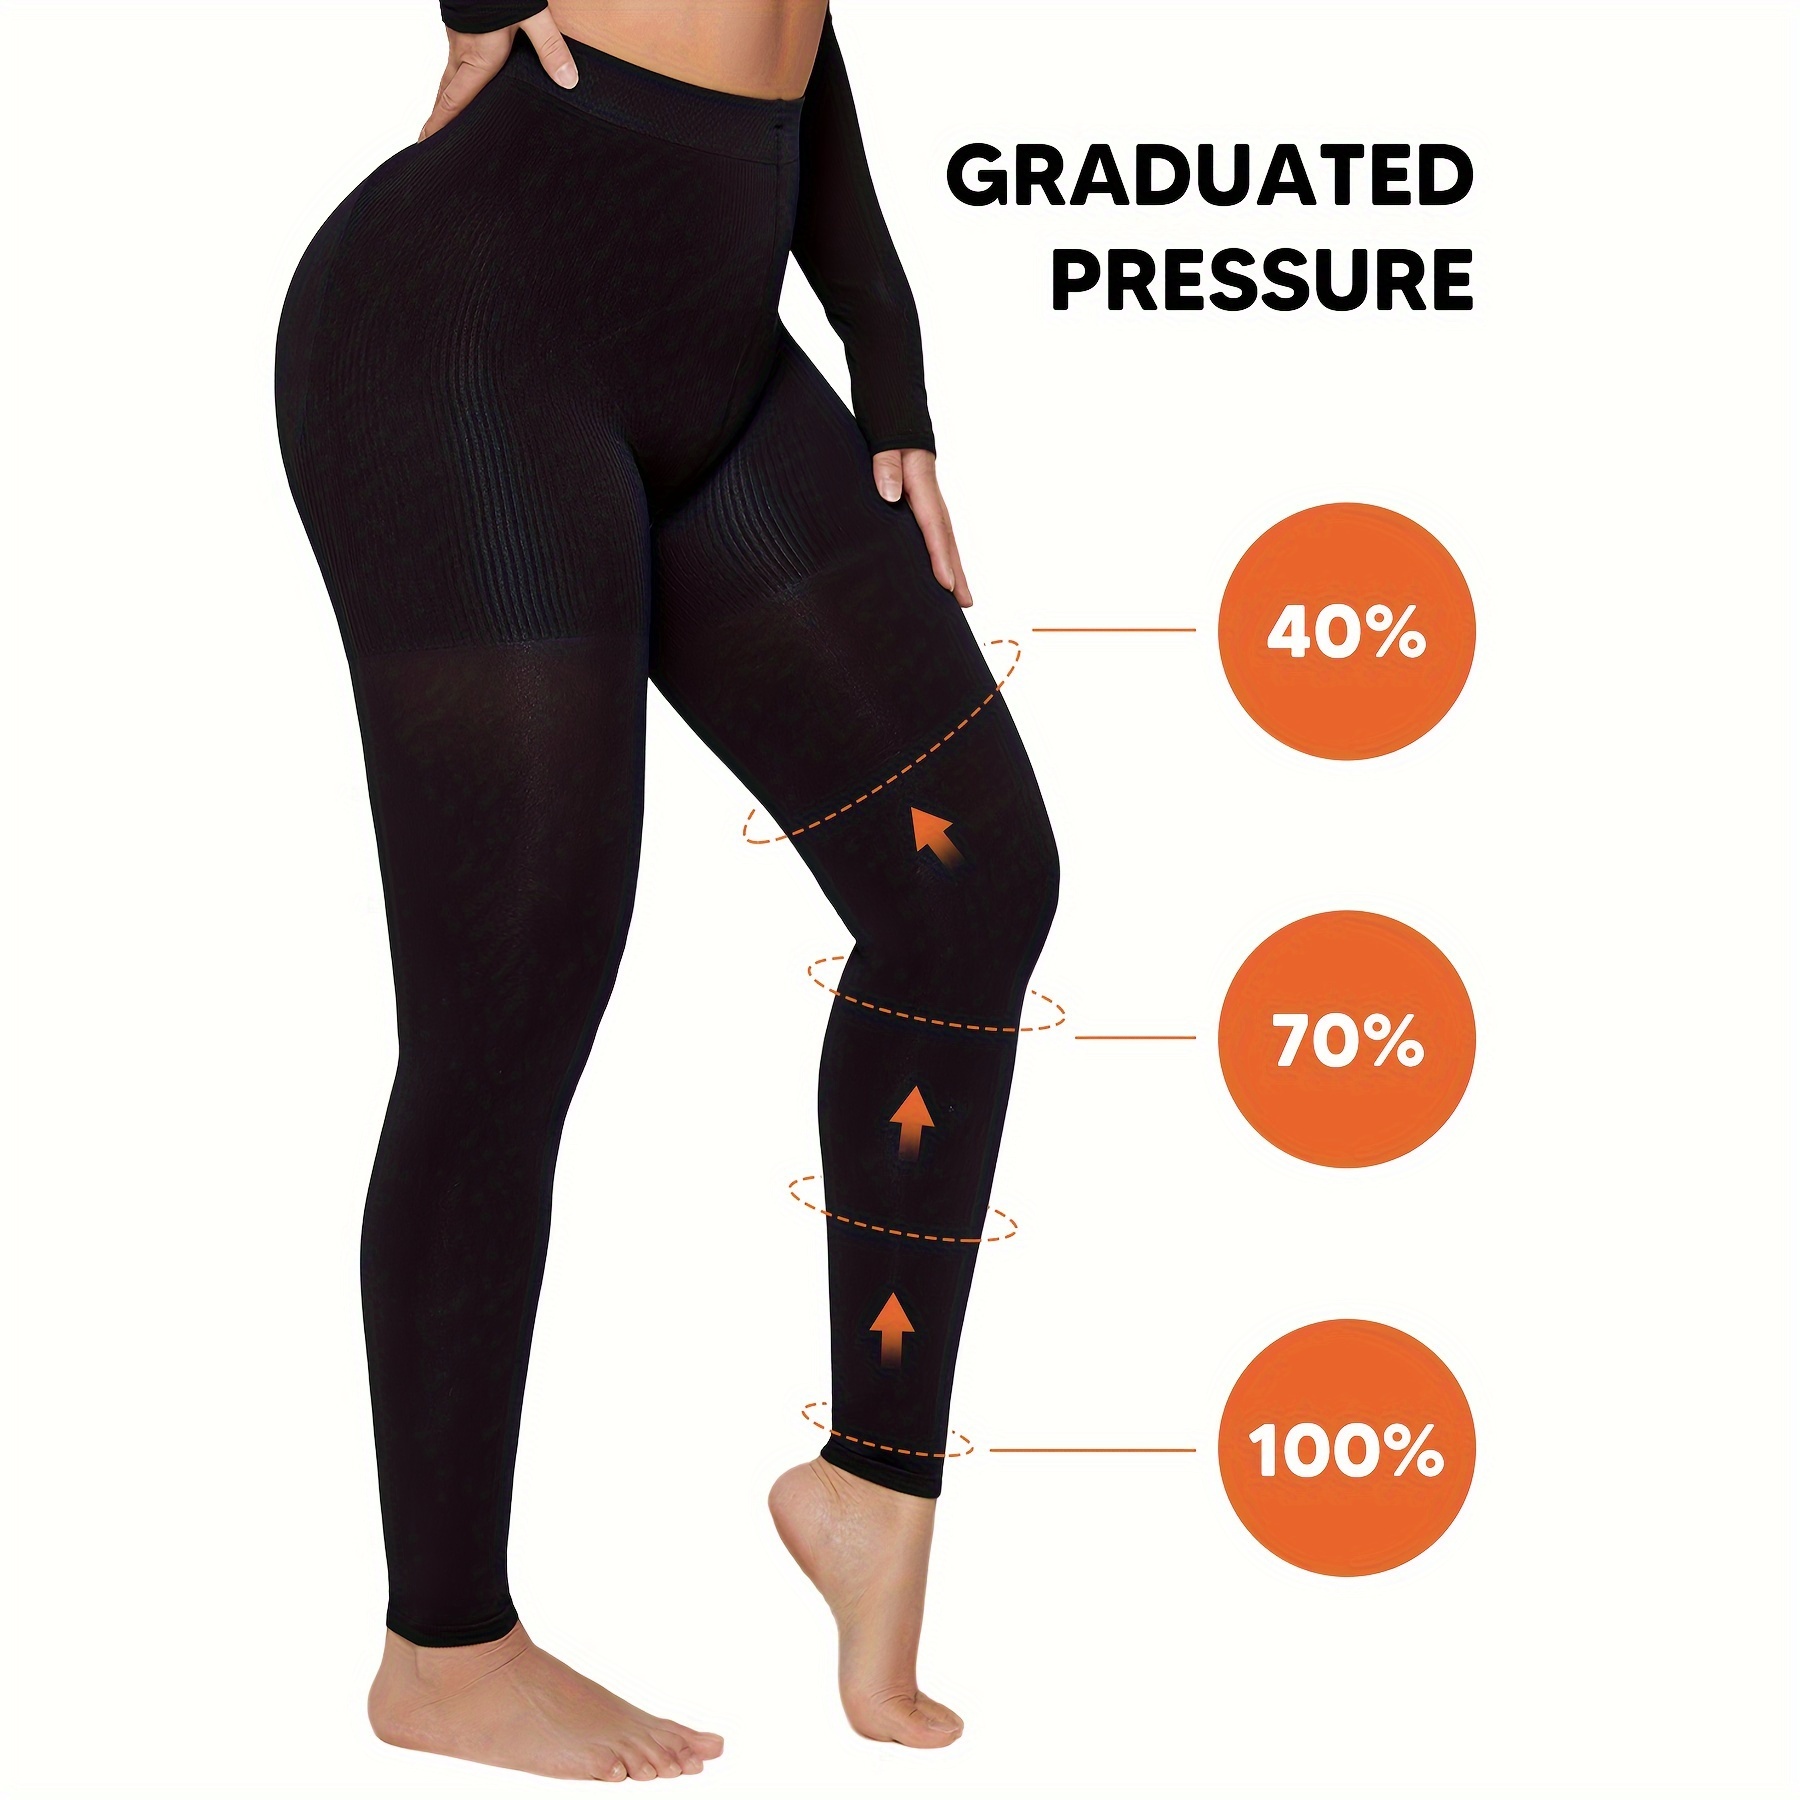 XL Opaque Graduated Compression Leggings with Control Top - 1 Pair